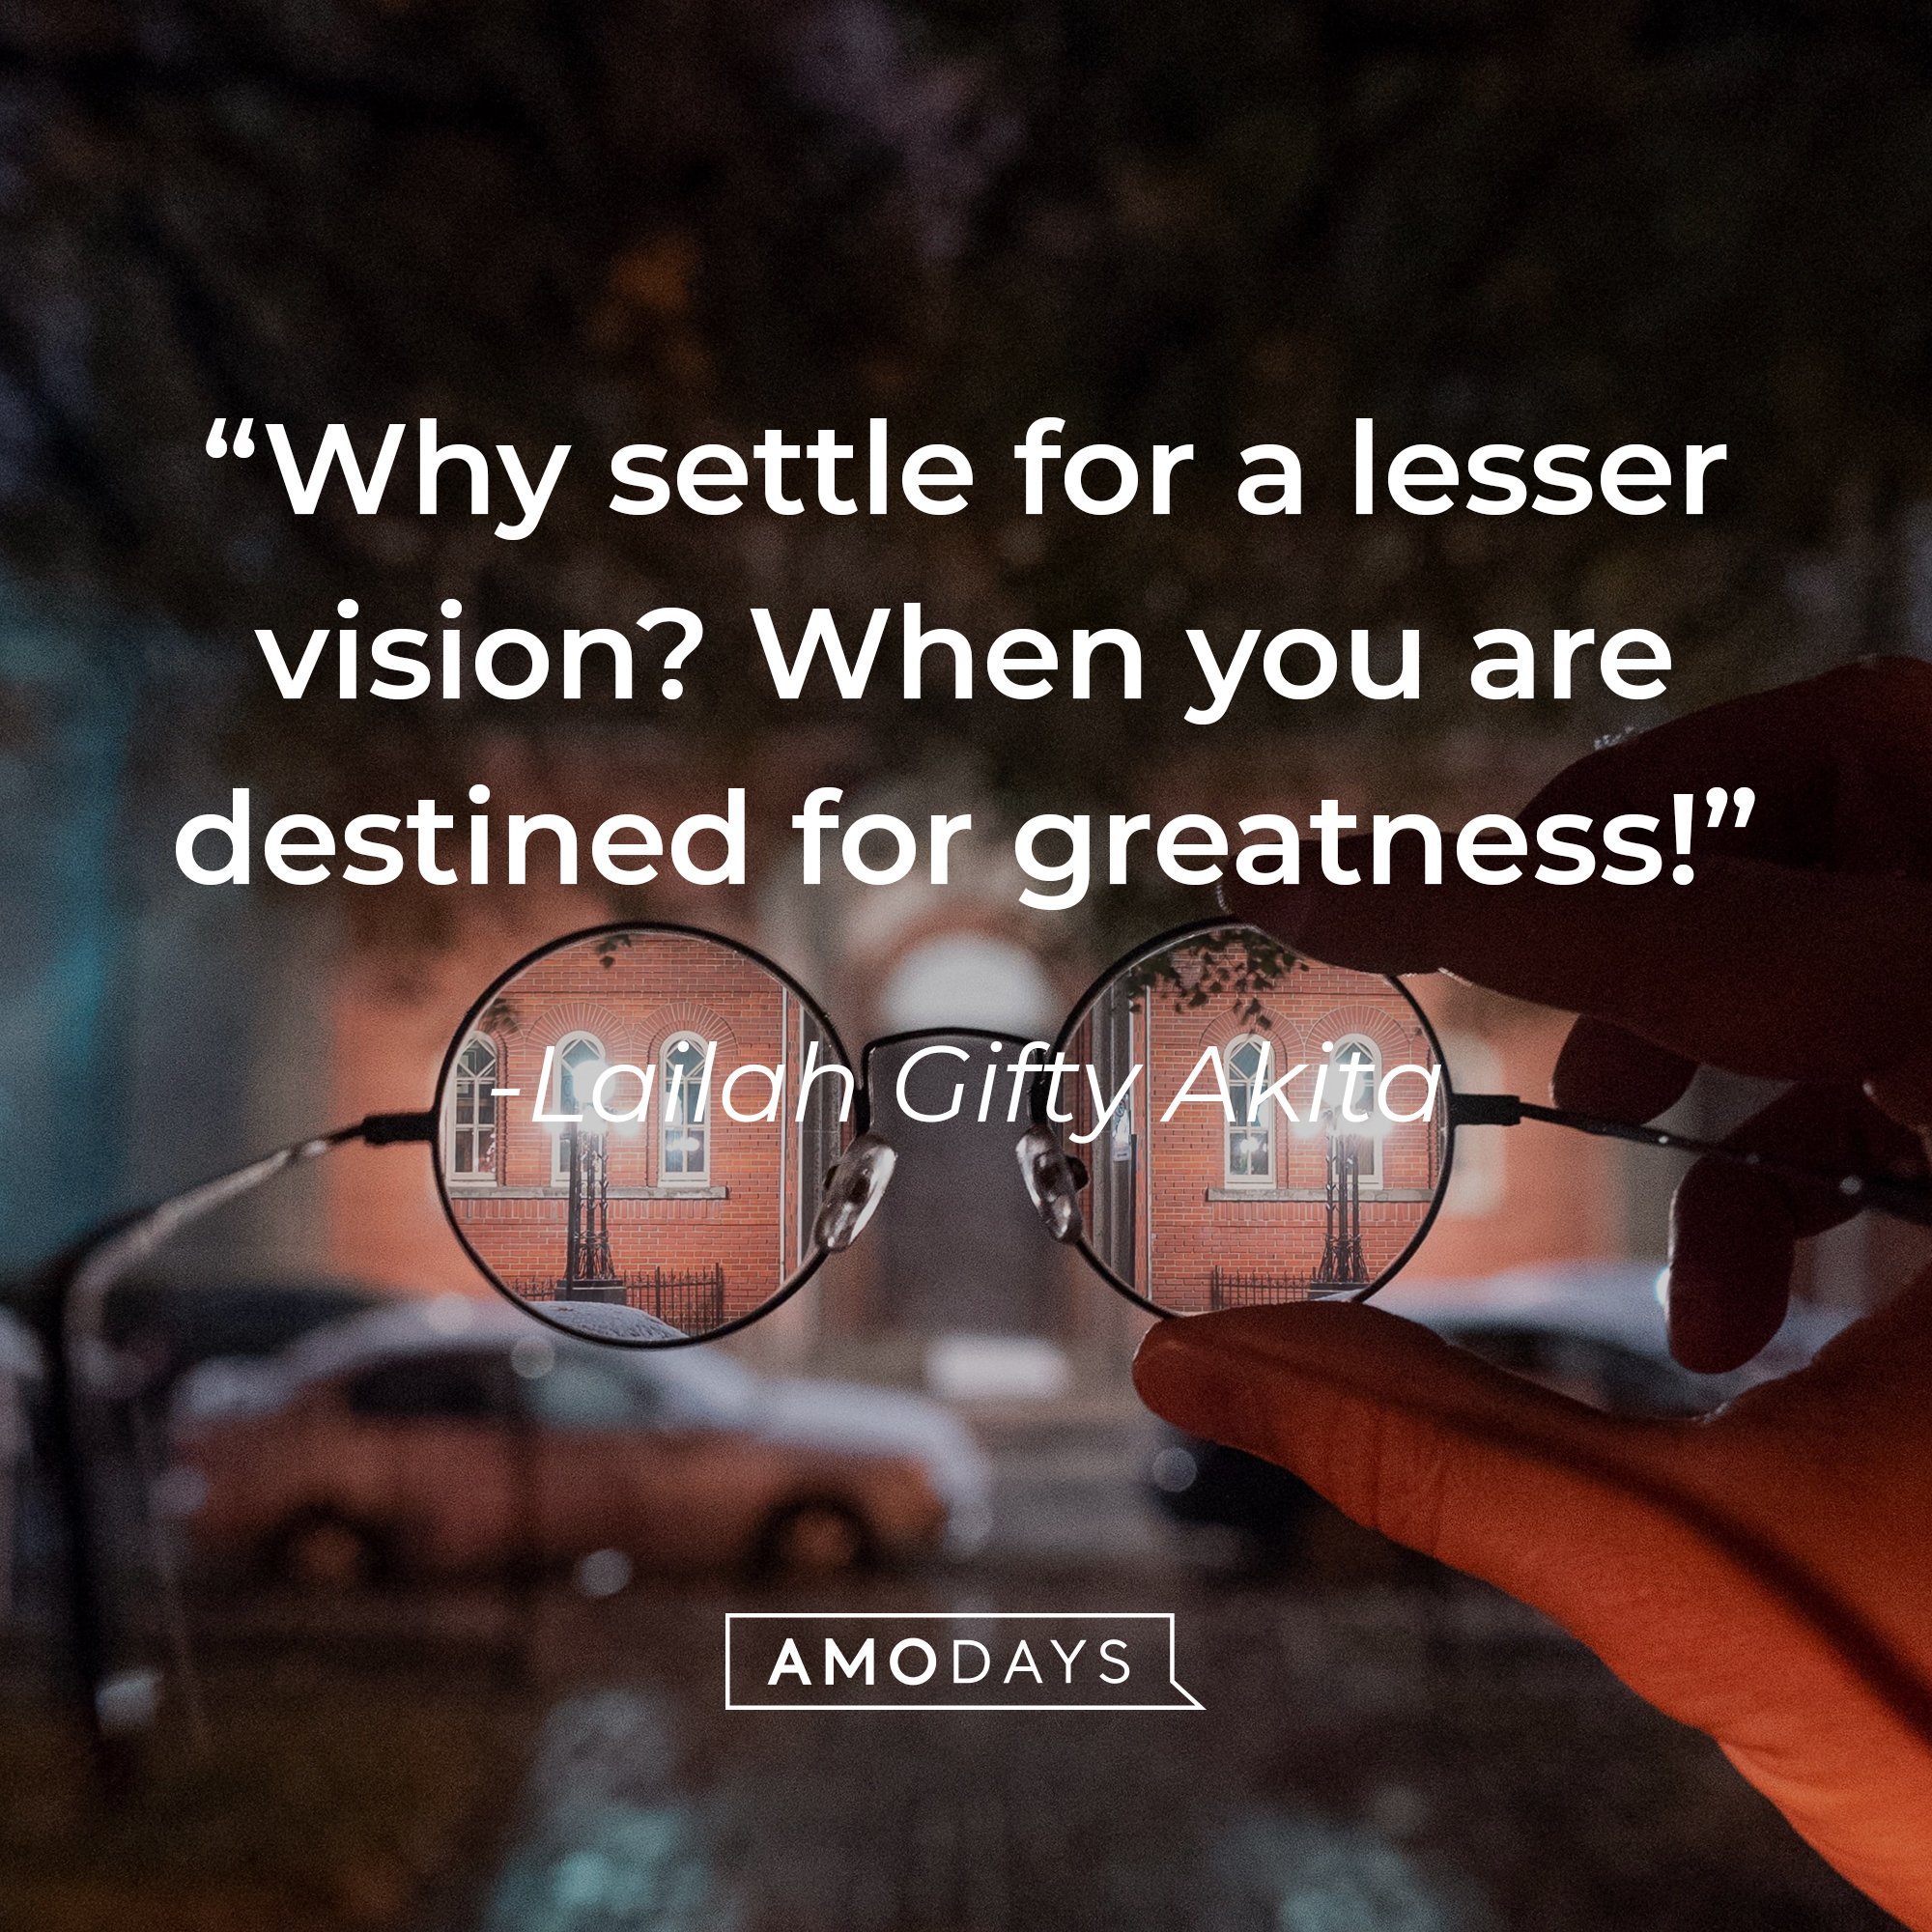 Lailah Gifty Akita's quote: “Why settle for a lesser vision? When you are destined for greatness!” | Image: AmoDays